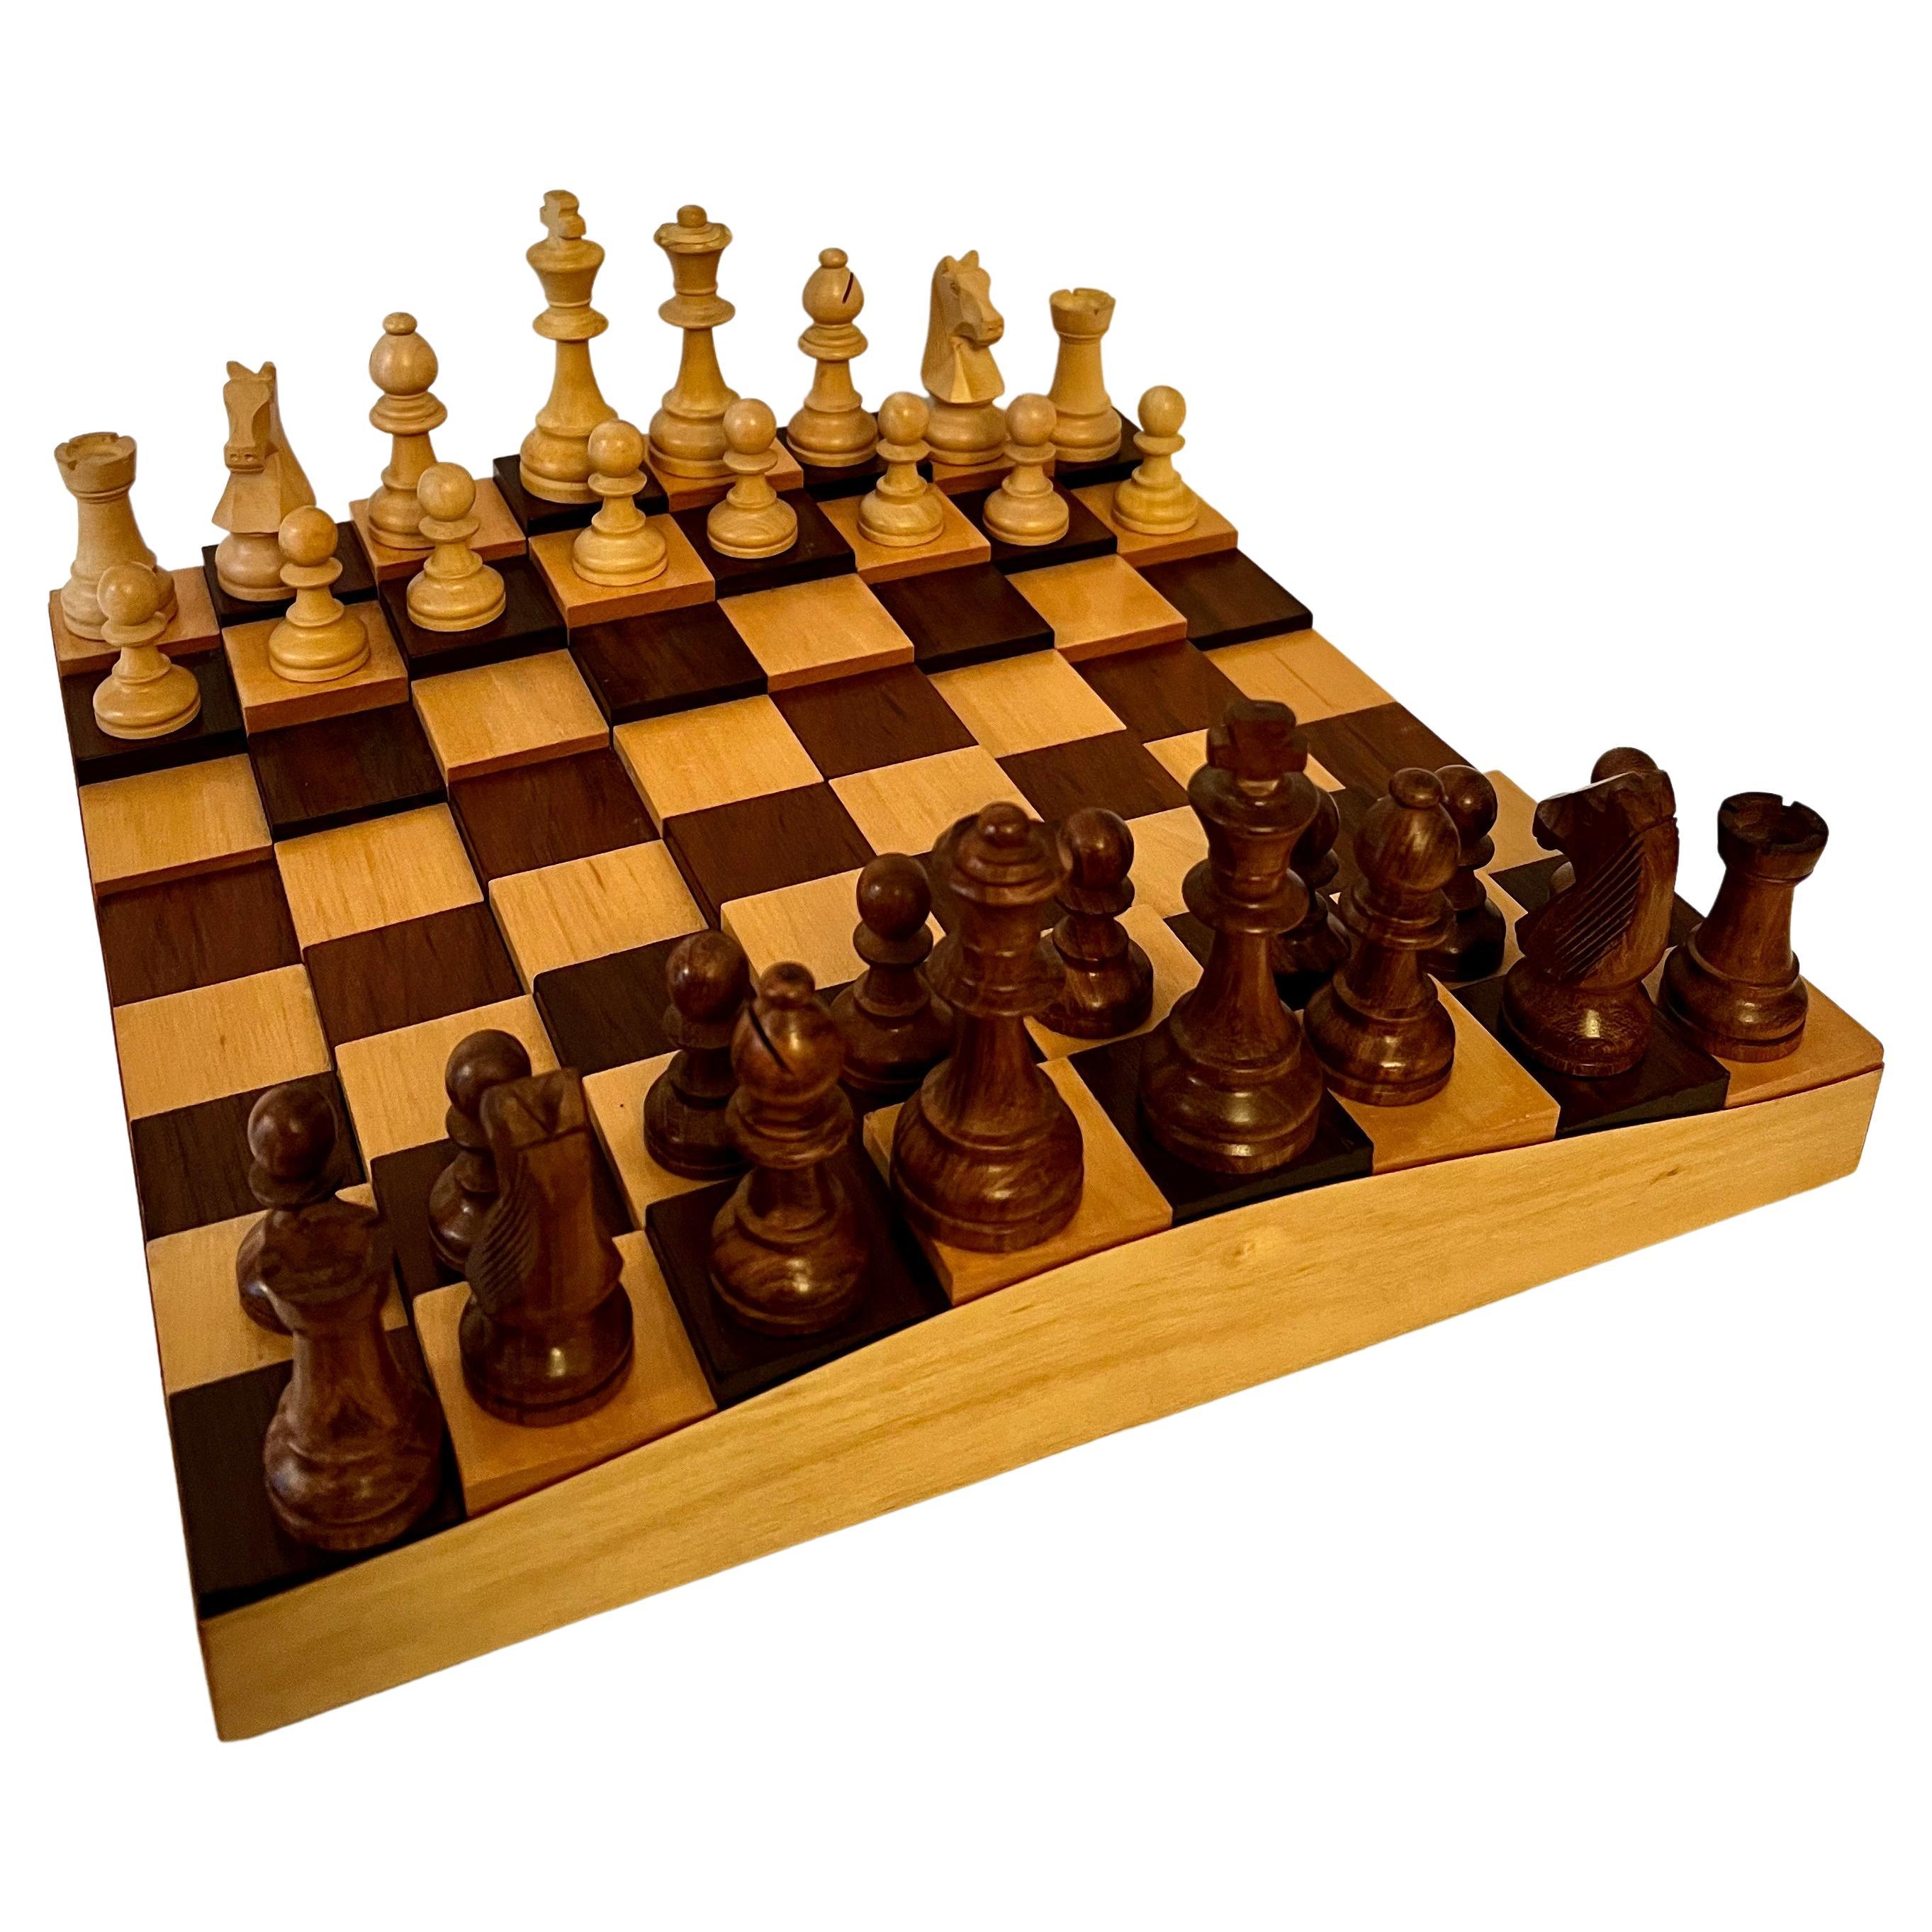 3 Dimensional Wooden Chess or Checker Board with Chess Players For Sale